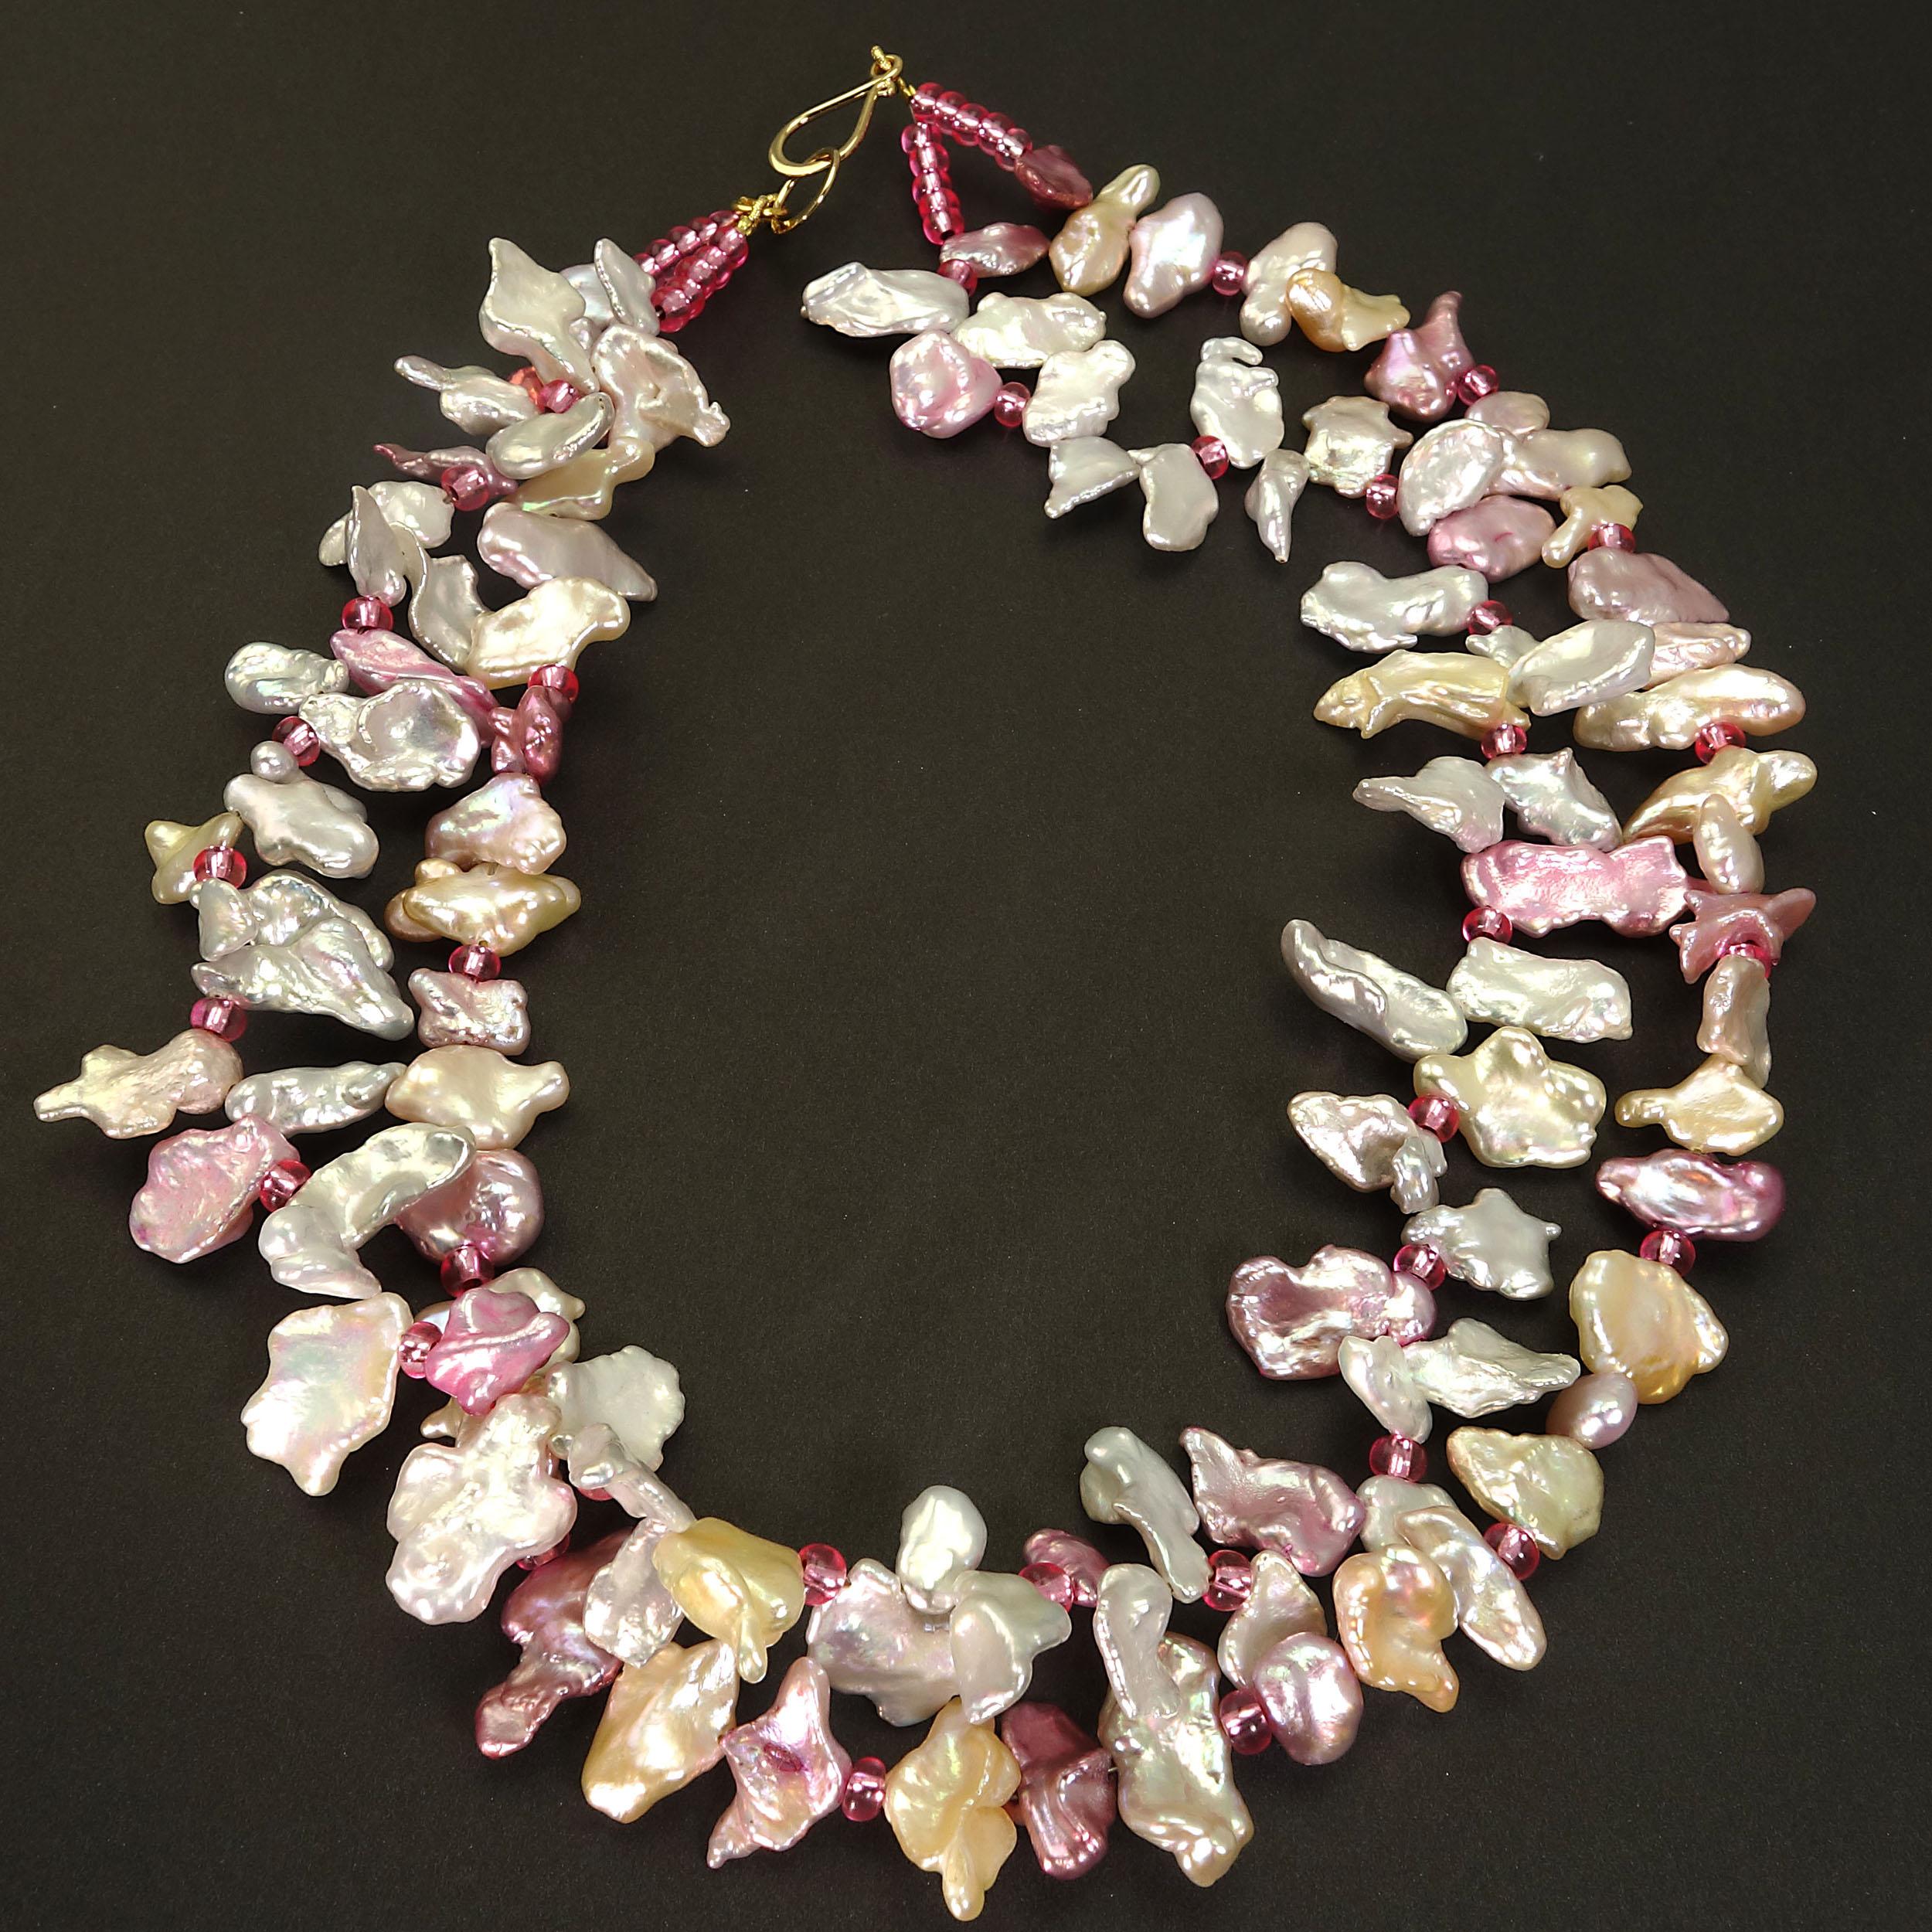 
'Pearls are always appropriate'   Jackie Kennedy

Unique two strand necklace of dyed freshwater Pearls in pink and white with pink Czech bead accents.  This lovely necklace sits just at 16 inches and can be given a gentle twist or two to shorten to